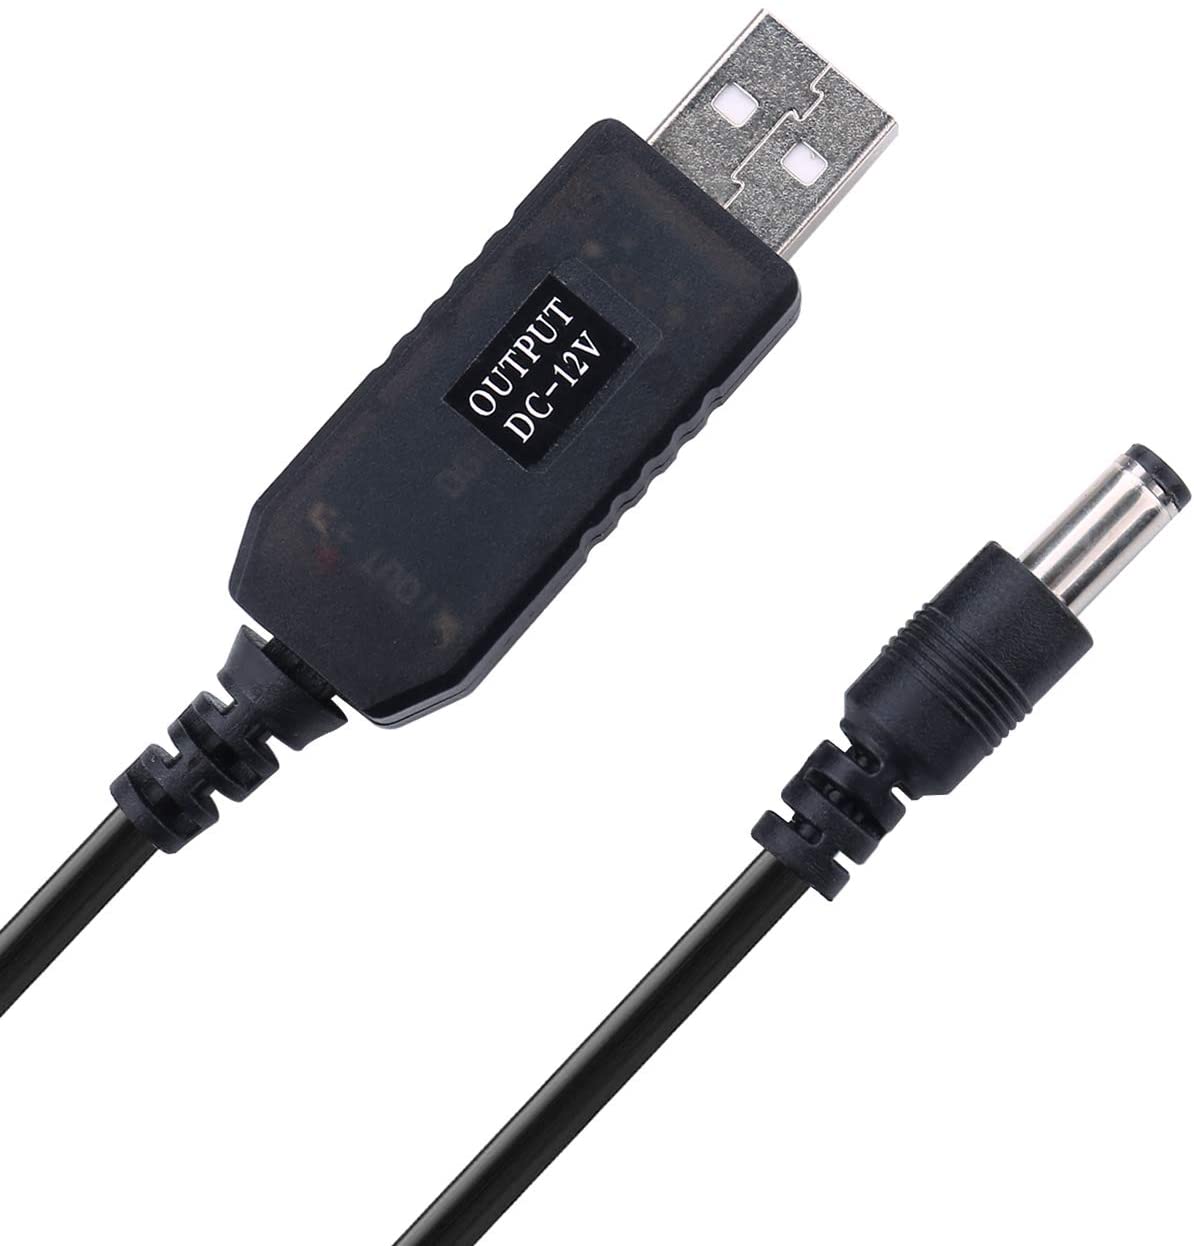 Details about   DC 5V to DC 12V USB Voltage Step Up Converter Cable iGreely Power Supply USB x 